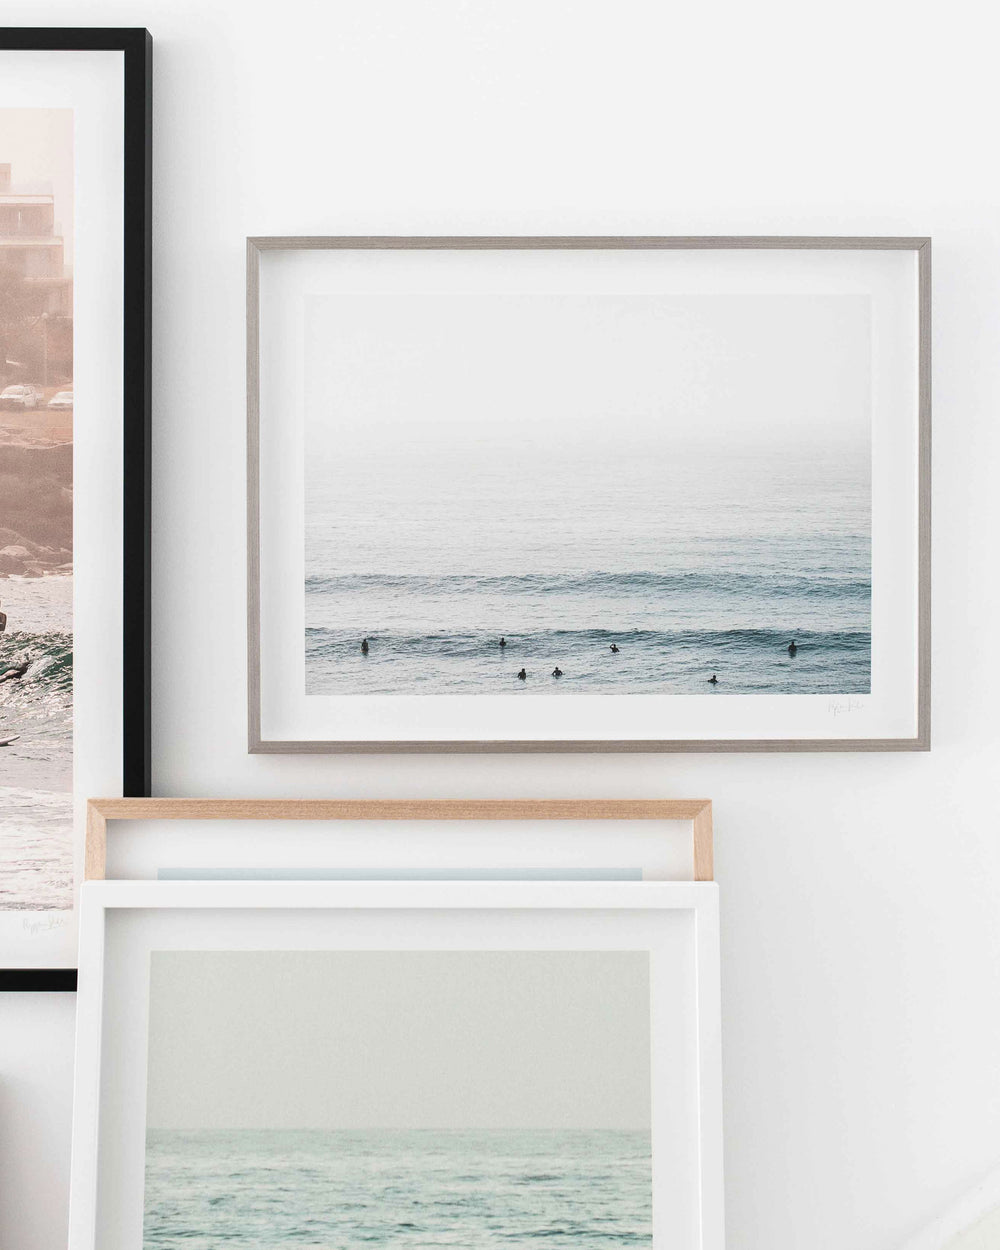 Denim Waves – Photographic print by Poppie Pack. Printed and framed in Sydney.